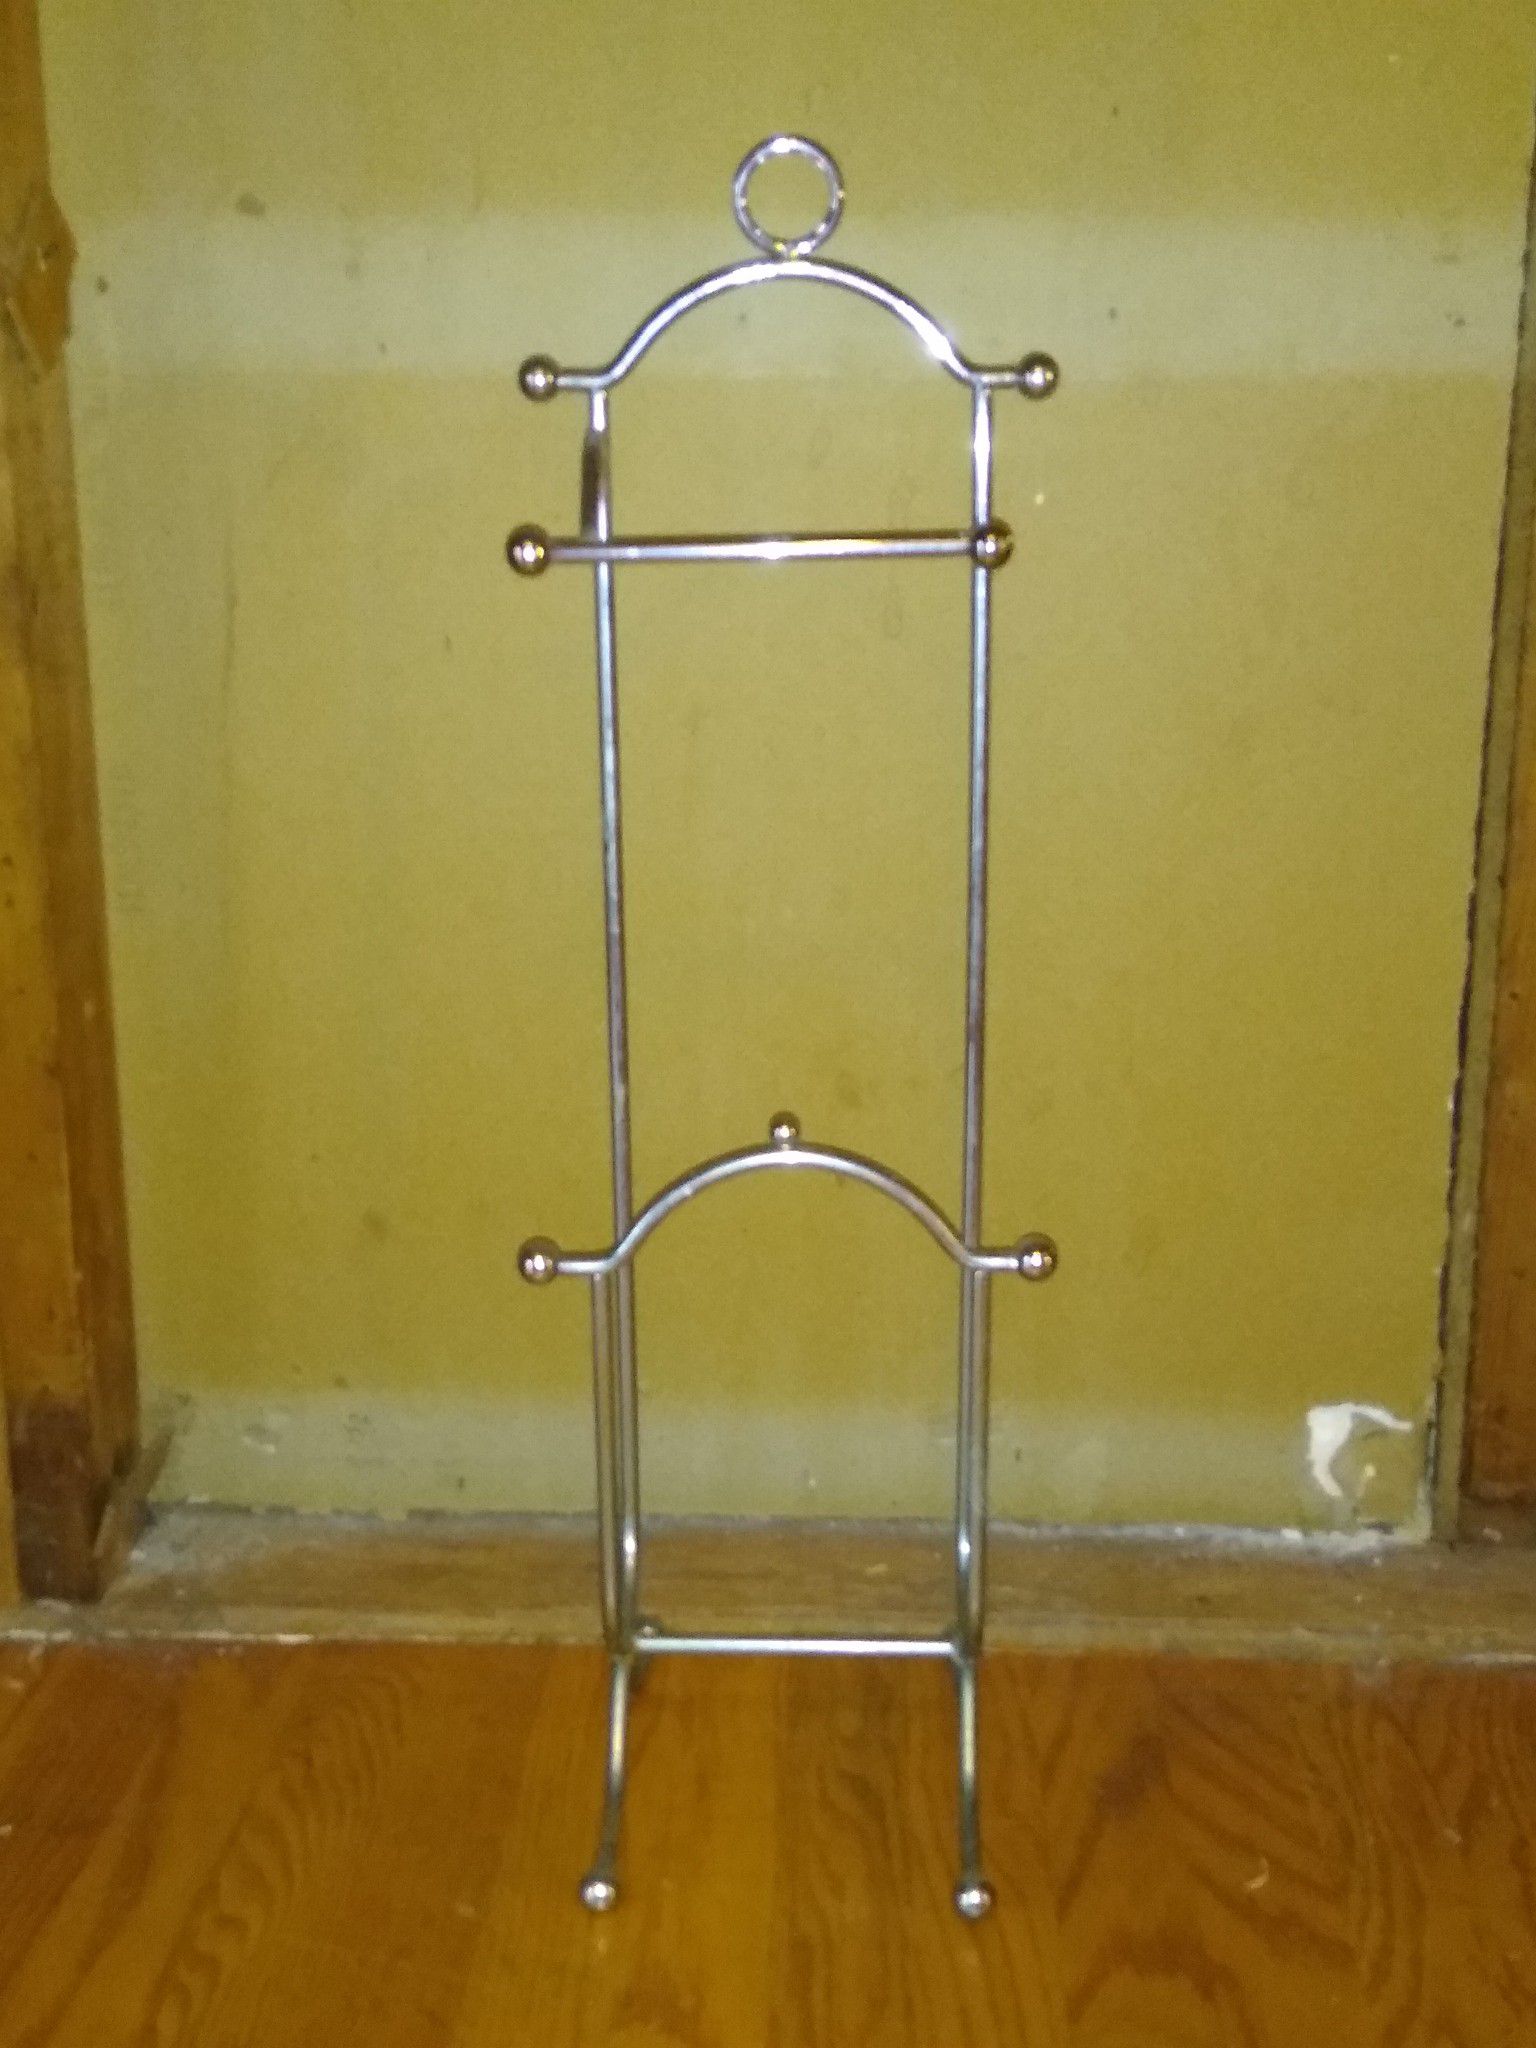 Stainless steel toilet paper holder and magazine rack